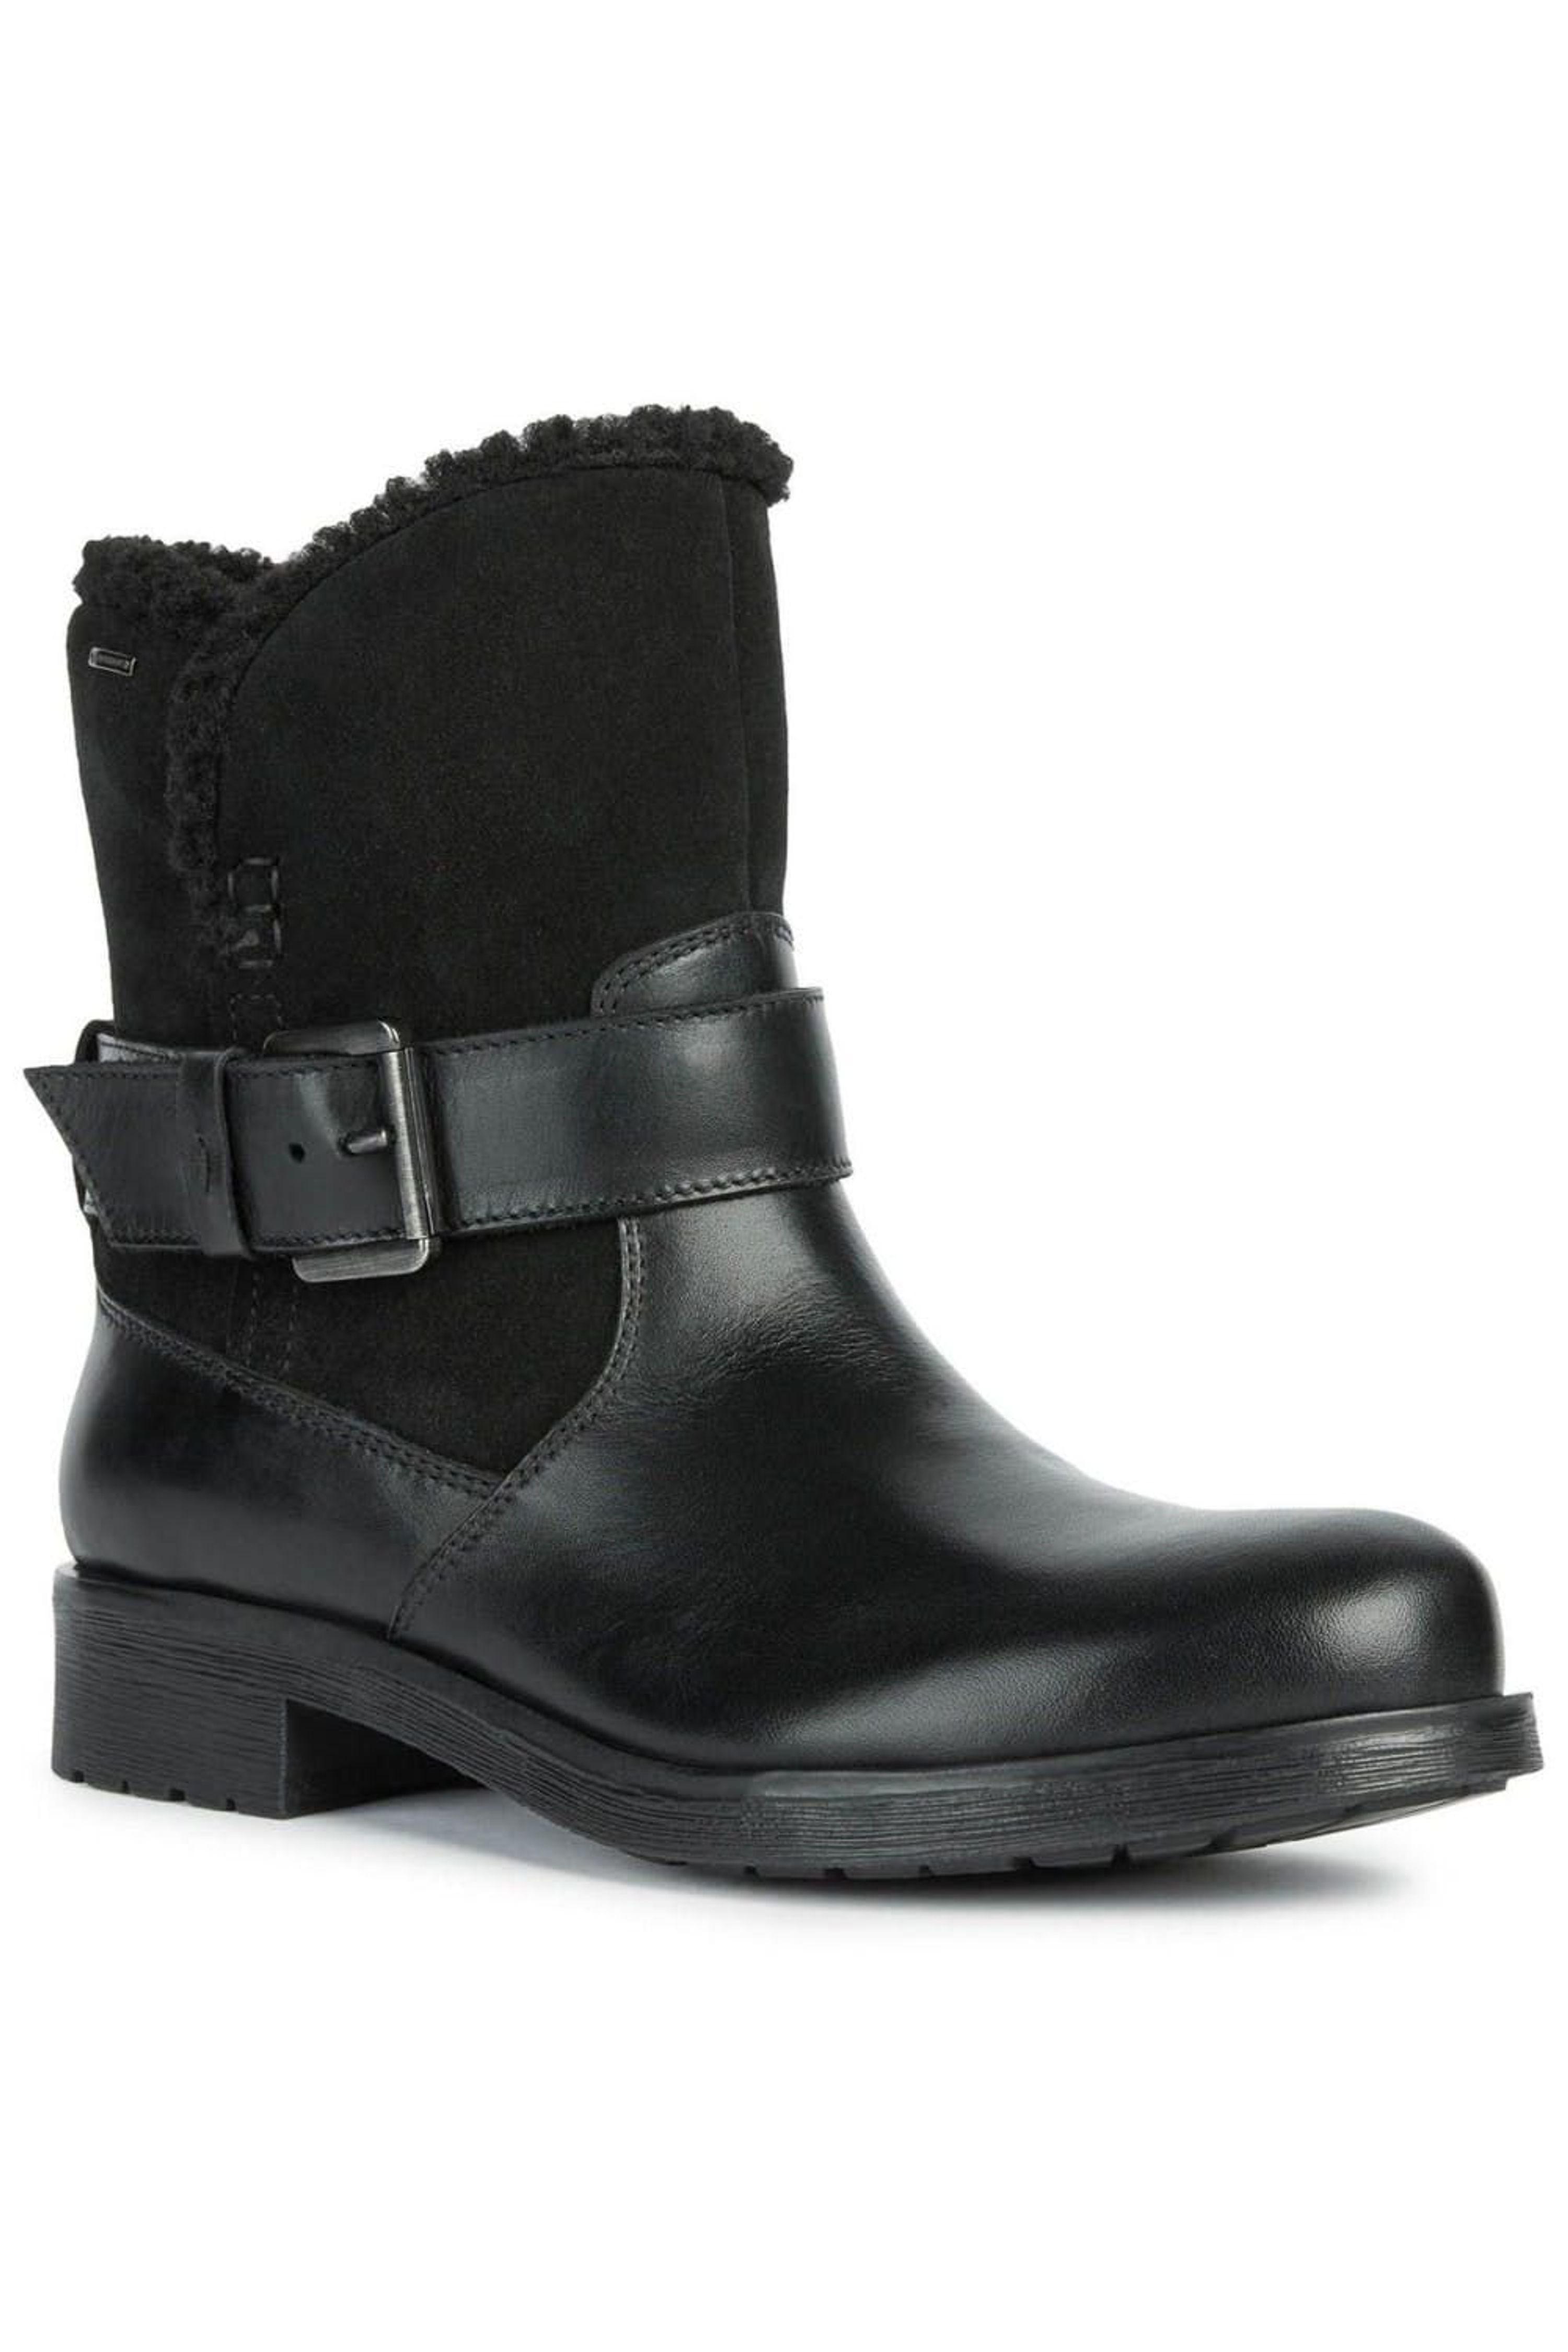 Geox Rawelle Nappa Leather Ankle Boots in Black | Lyst